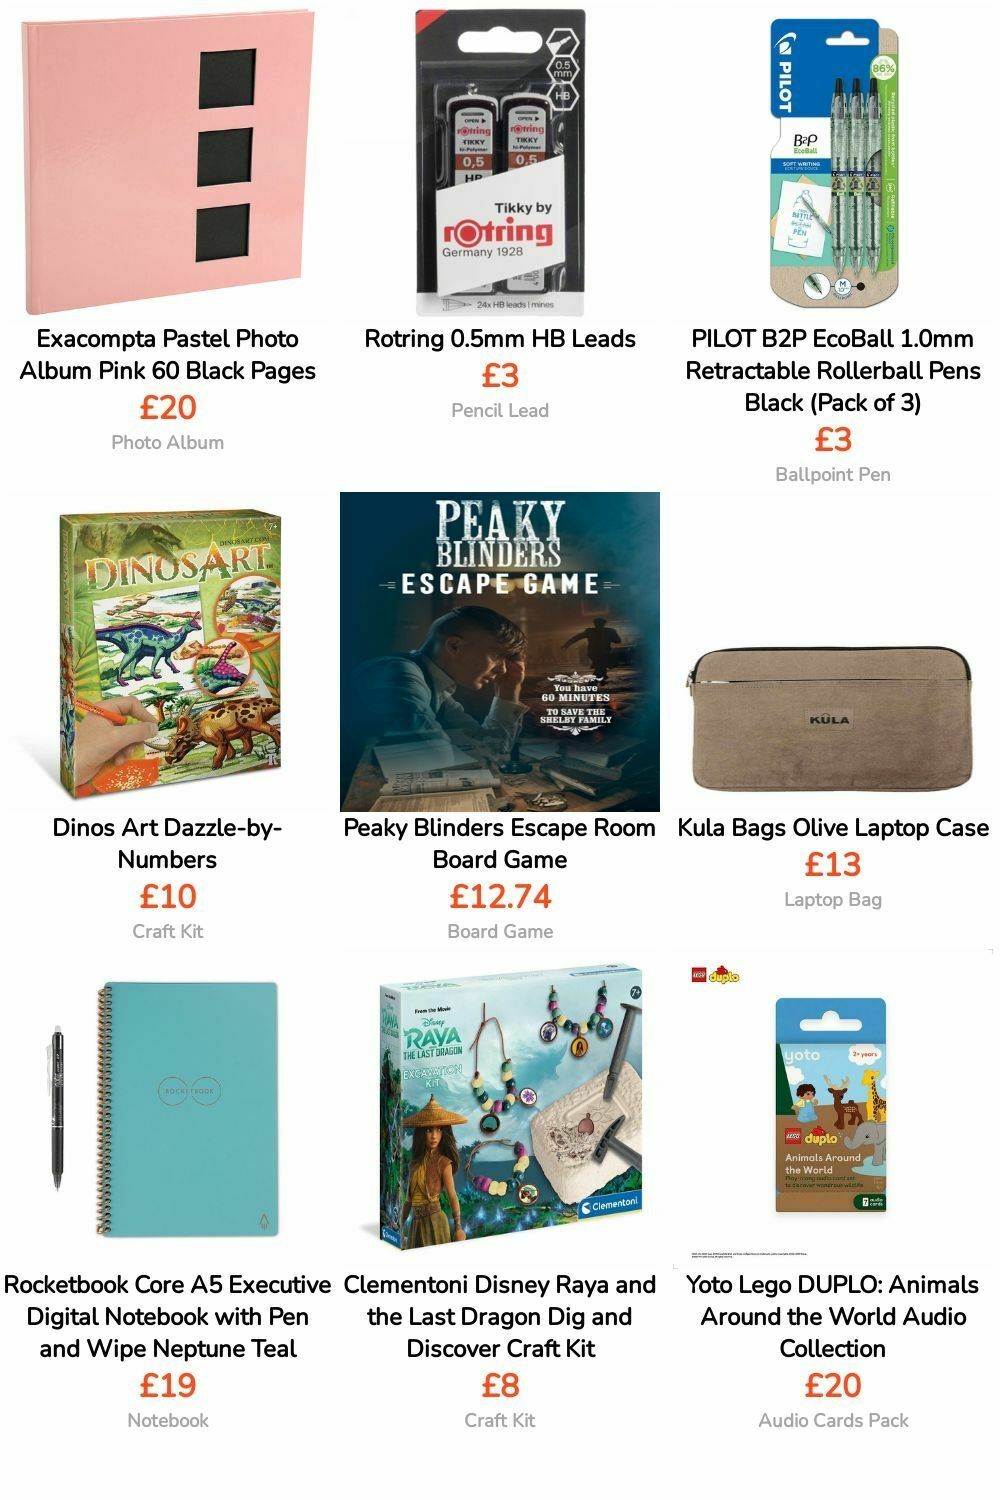 WHSmith Offers from 1 April